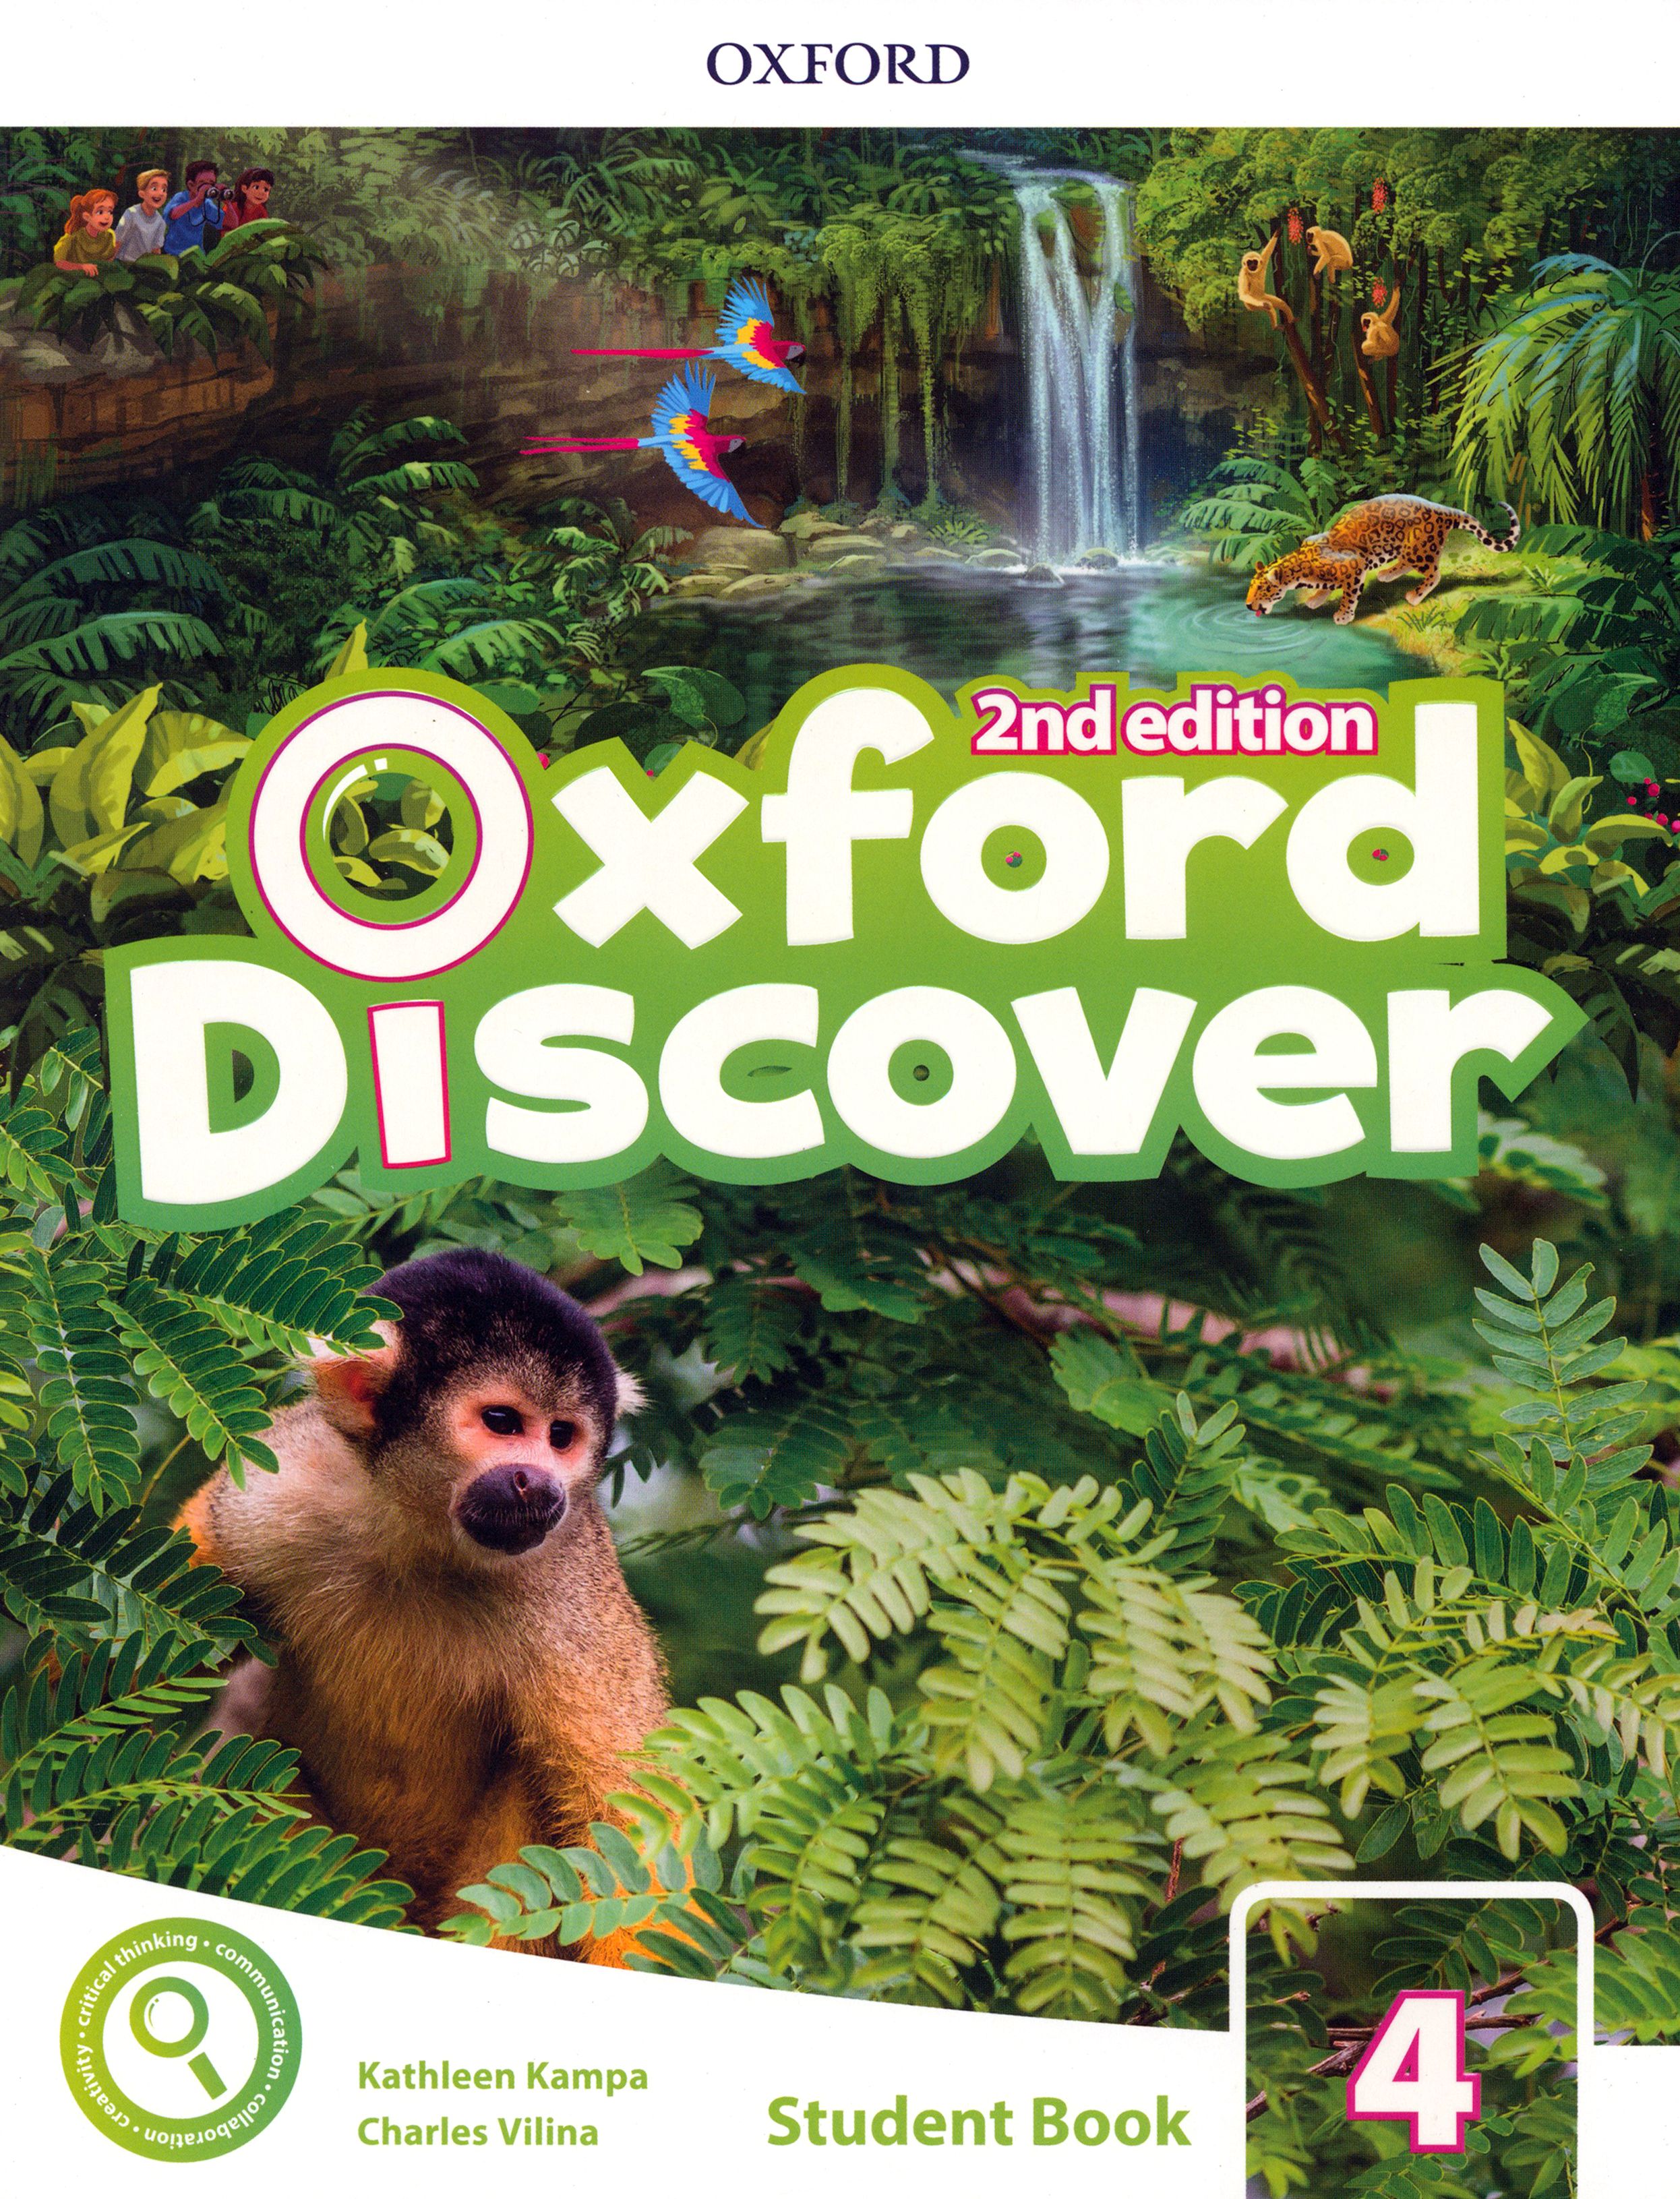 Oxford discover 4 2nd Edition. Oxford discover 2nd Edition 5. Oxford discover 2nd Edition. Oxford discover 2 student book. Discover students book